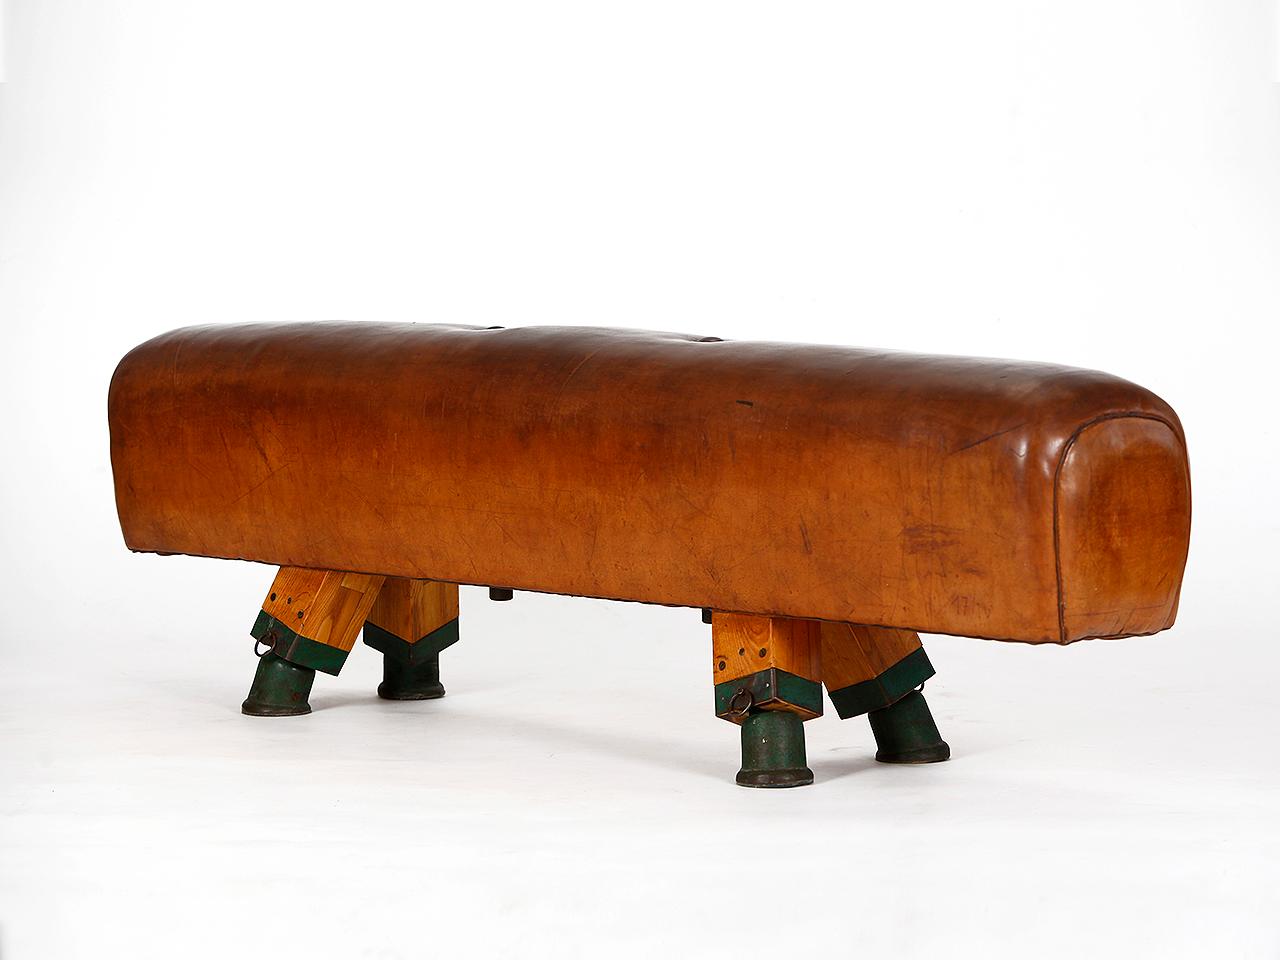 Pommel horse from former Czechoslovakia. It has been shortened to a height of 55 cm. The iron feet are preserved. The thick leather has been cleaned, restored wood surface and the patina was retained. Very good vintage condition. Completely